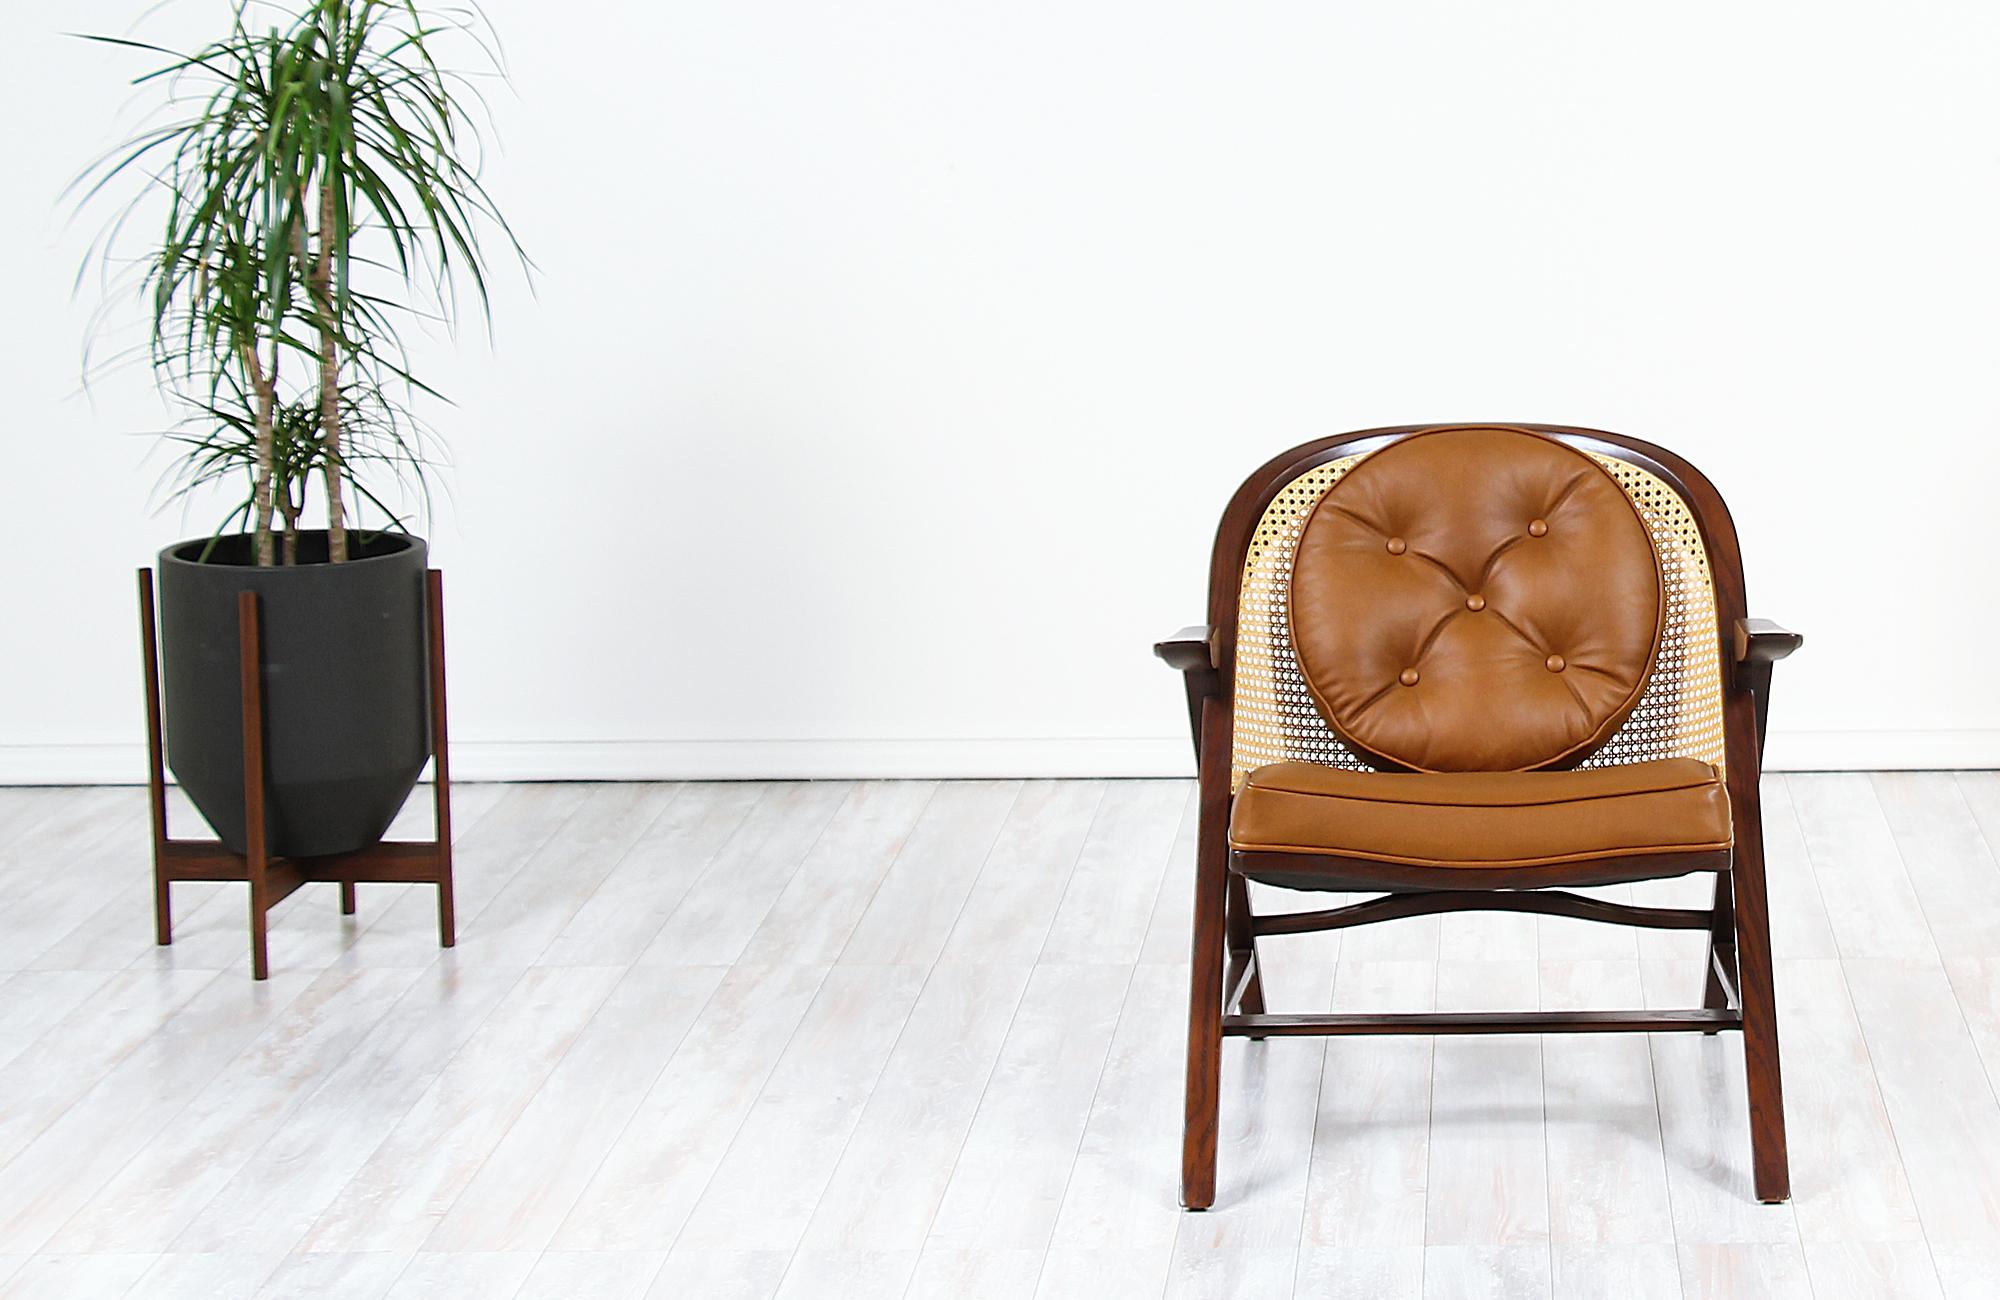 Iconic Model 5700-A lounge chair designed by Edward J. Wormley for Dunbar in the United States, circa 1950s. This rare design features a sturdily constructed walnut-stained oak wood frame with a newly woven cane backrest and new leather upholstery